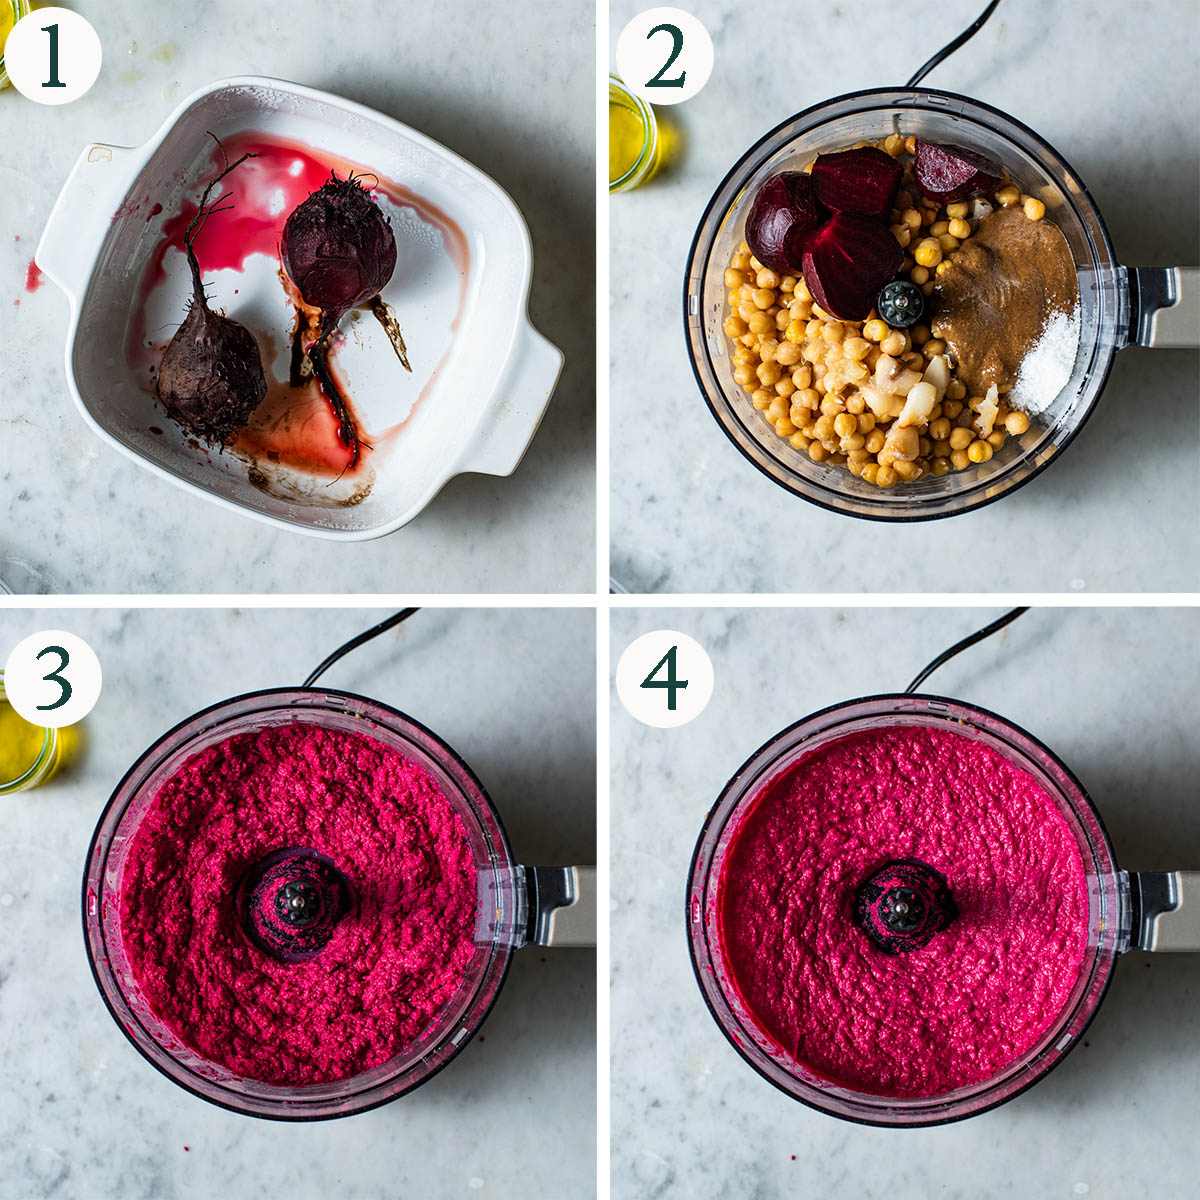 Hummus steps 1 to 4, roasted beets, hummus before and after blending.